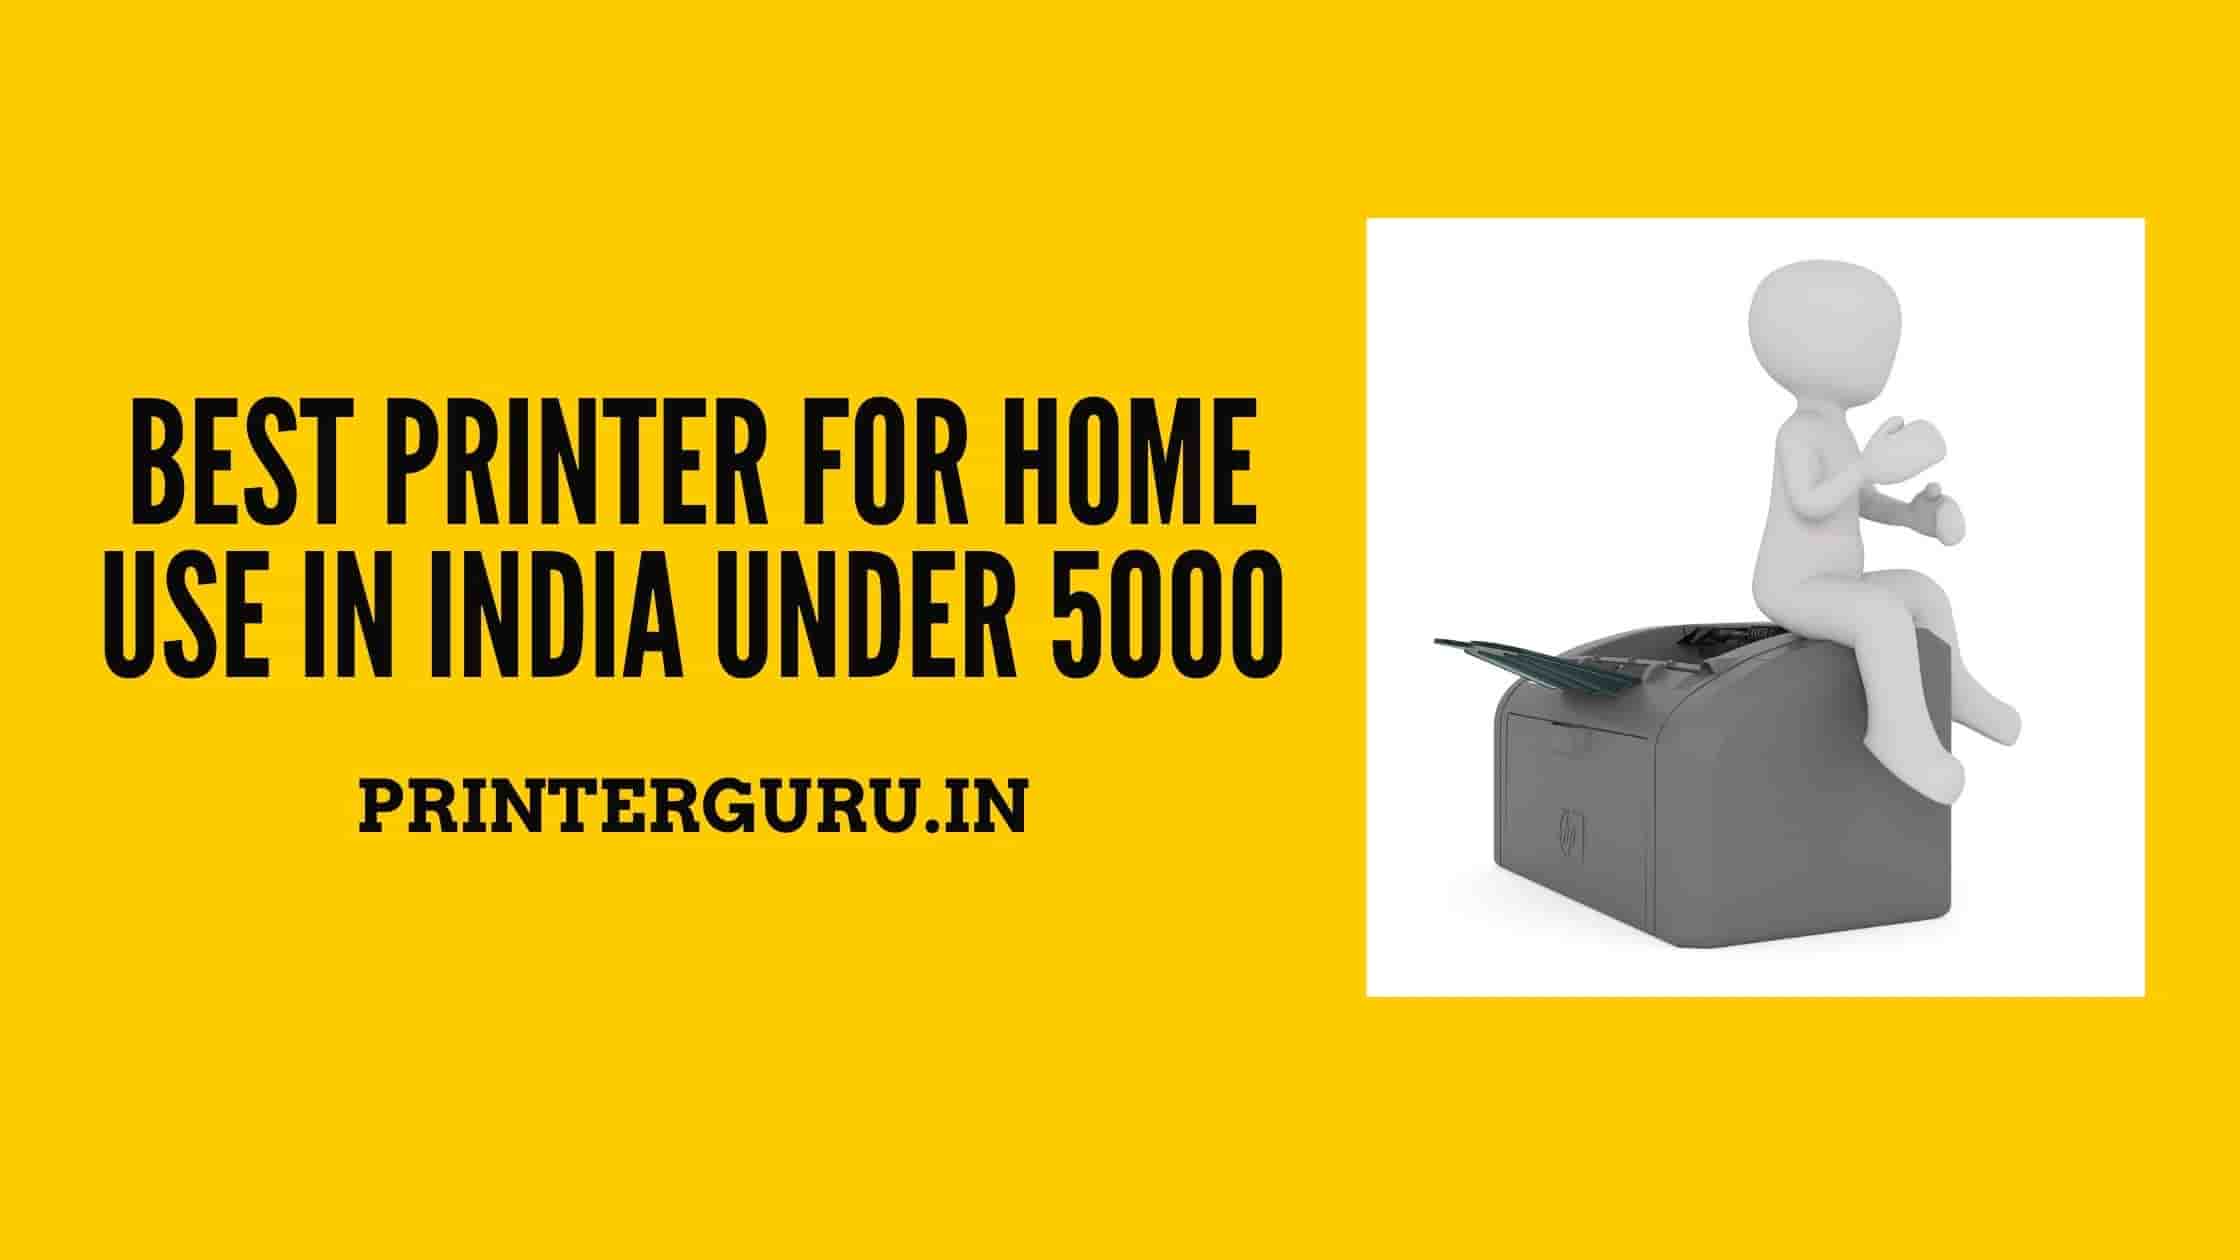 Best Printer for Home Use in India Under 5000